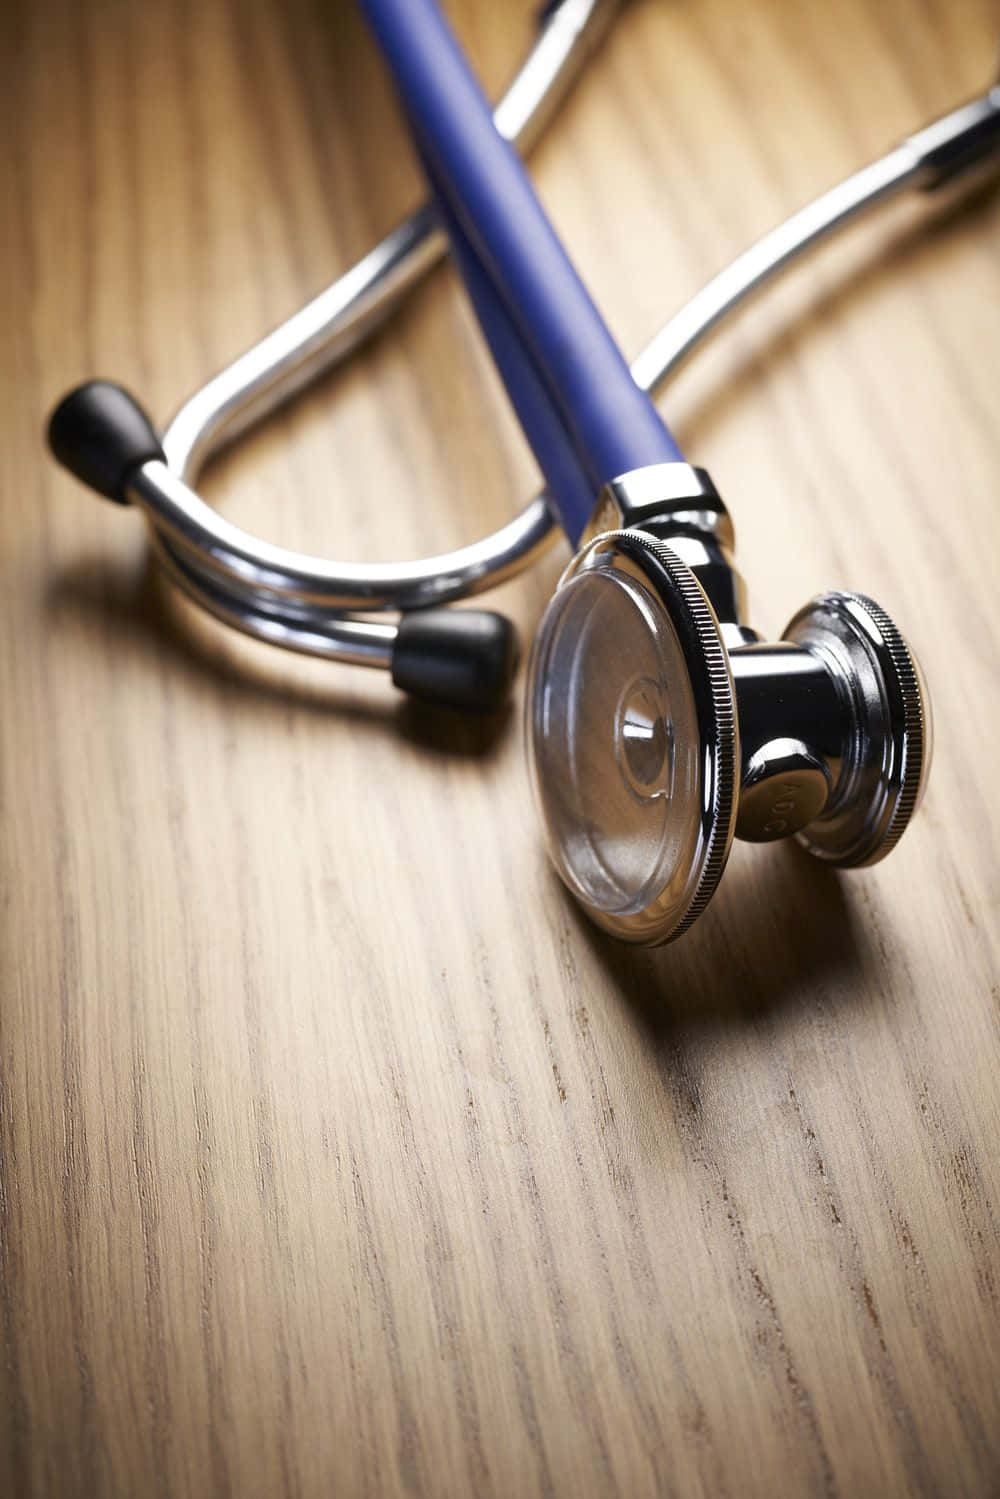 High Definition Image Of A Stethoscope On A Medical Table Background